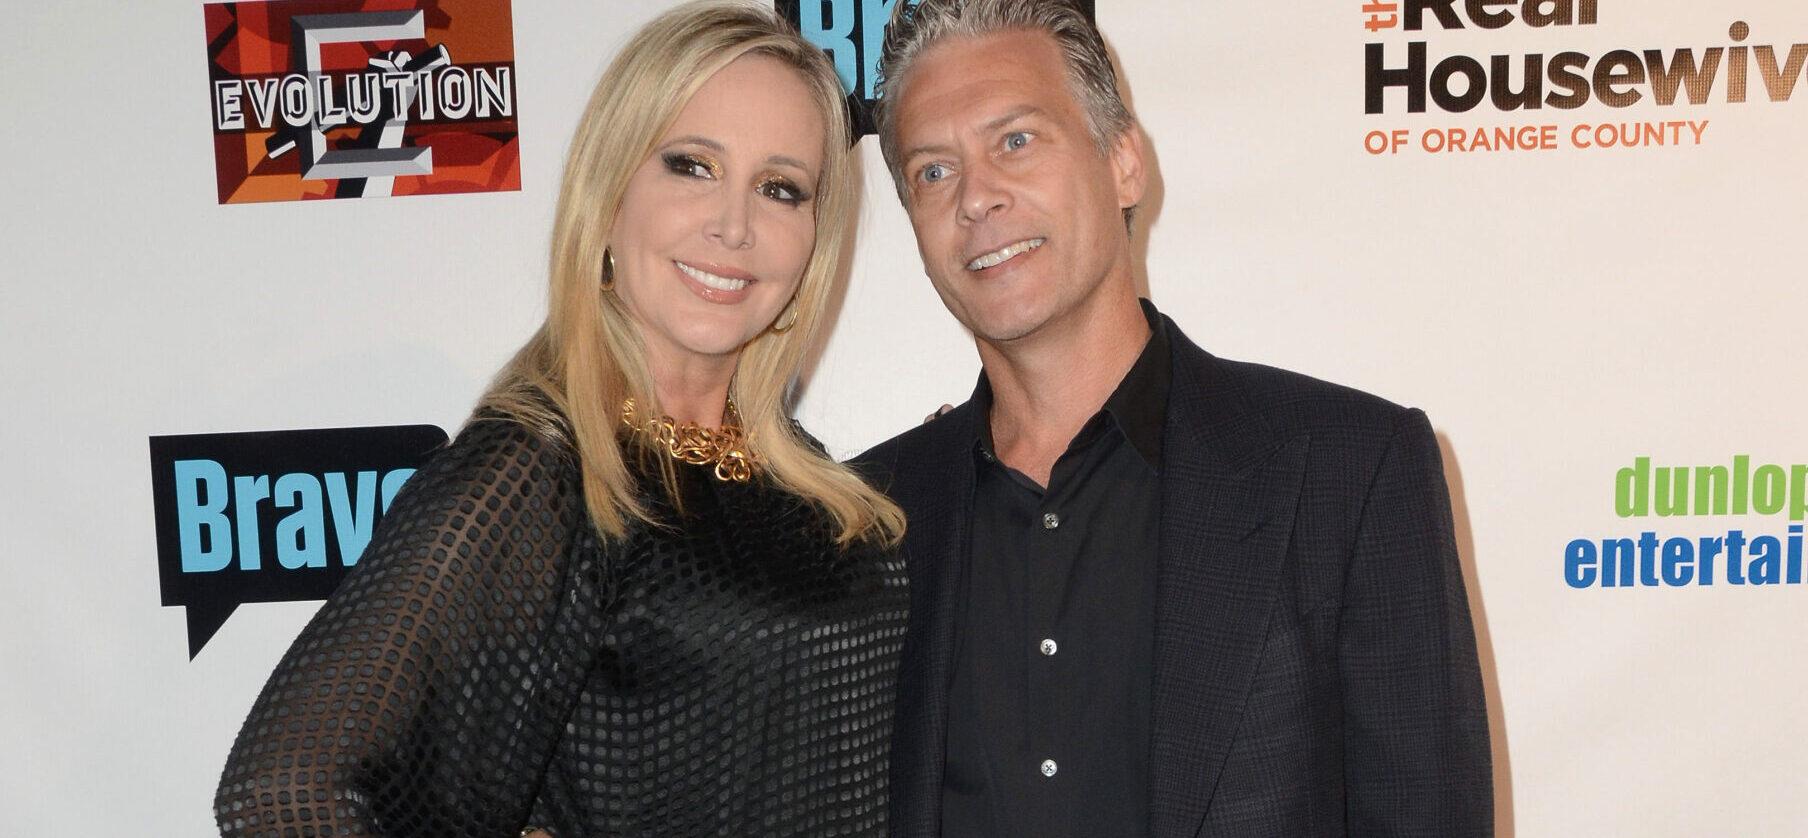 'RHOC' Star Shannon Beador At WAR With Ex-Husband Over Allowing Kids On Reality Show